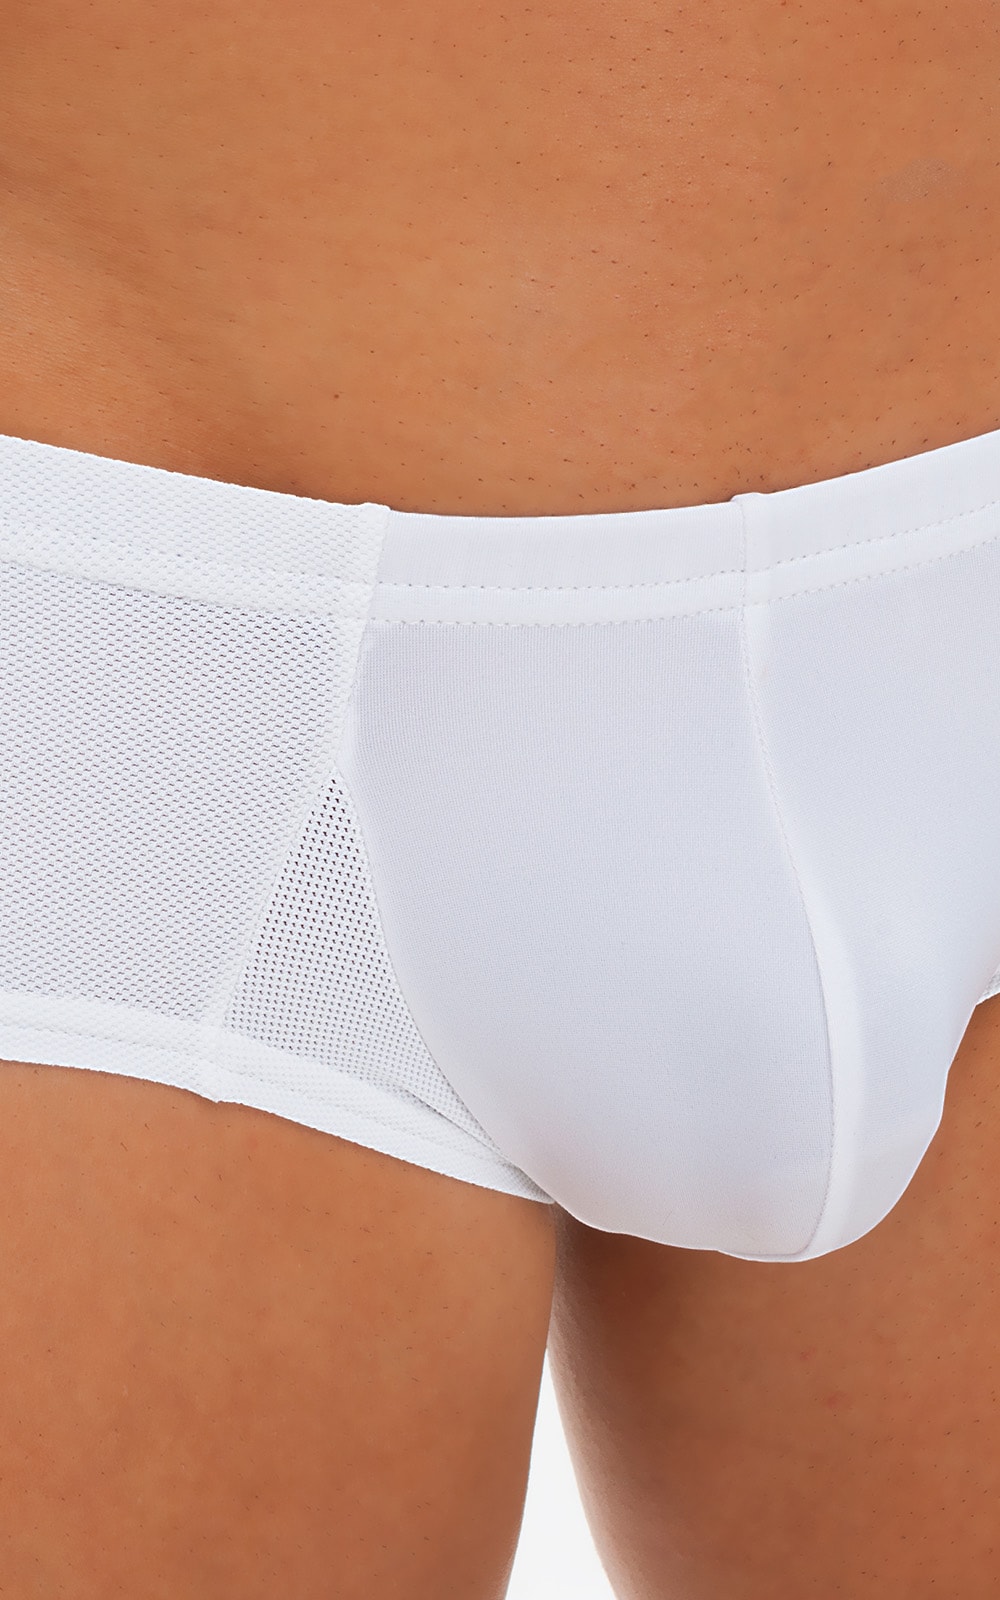 Pouch Enhanced Micro Square Cut Swim Trunks in Optic White and White Powernet 5